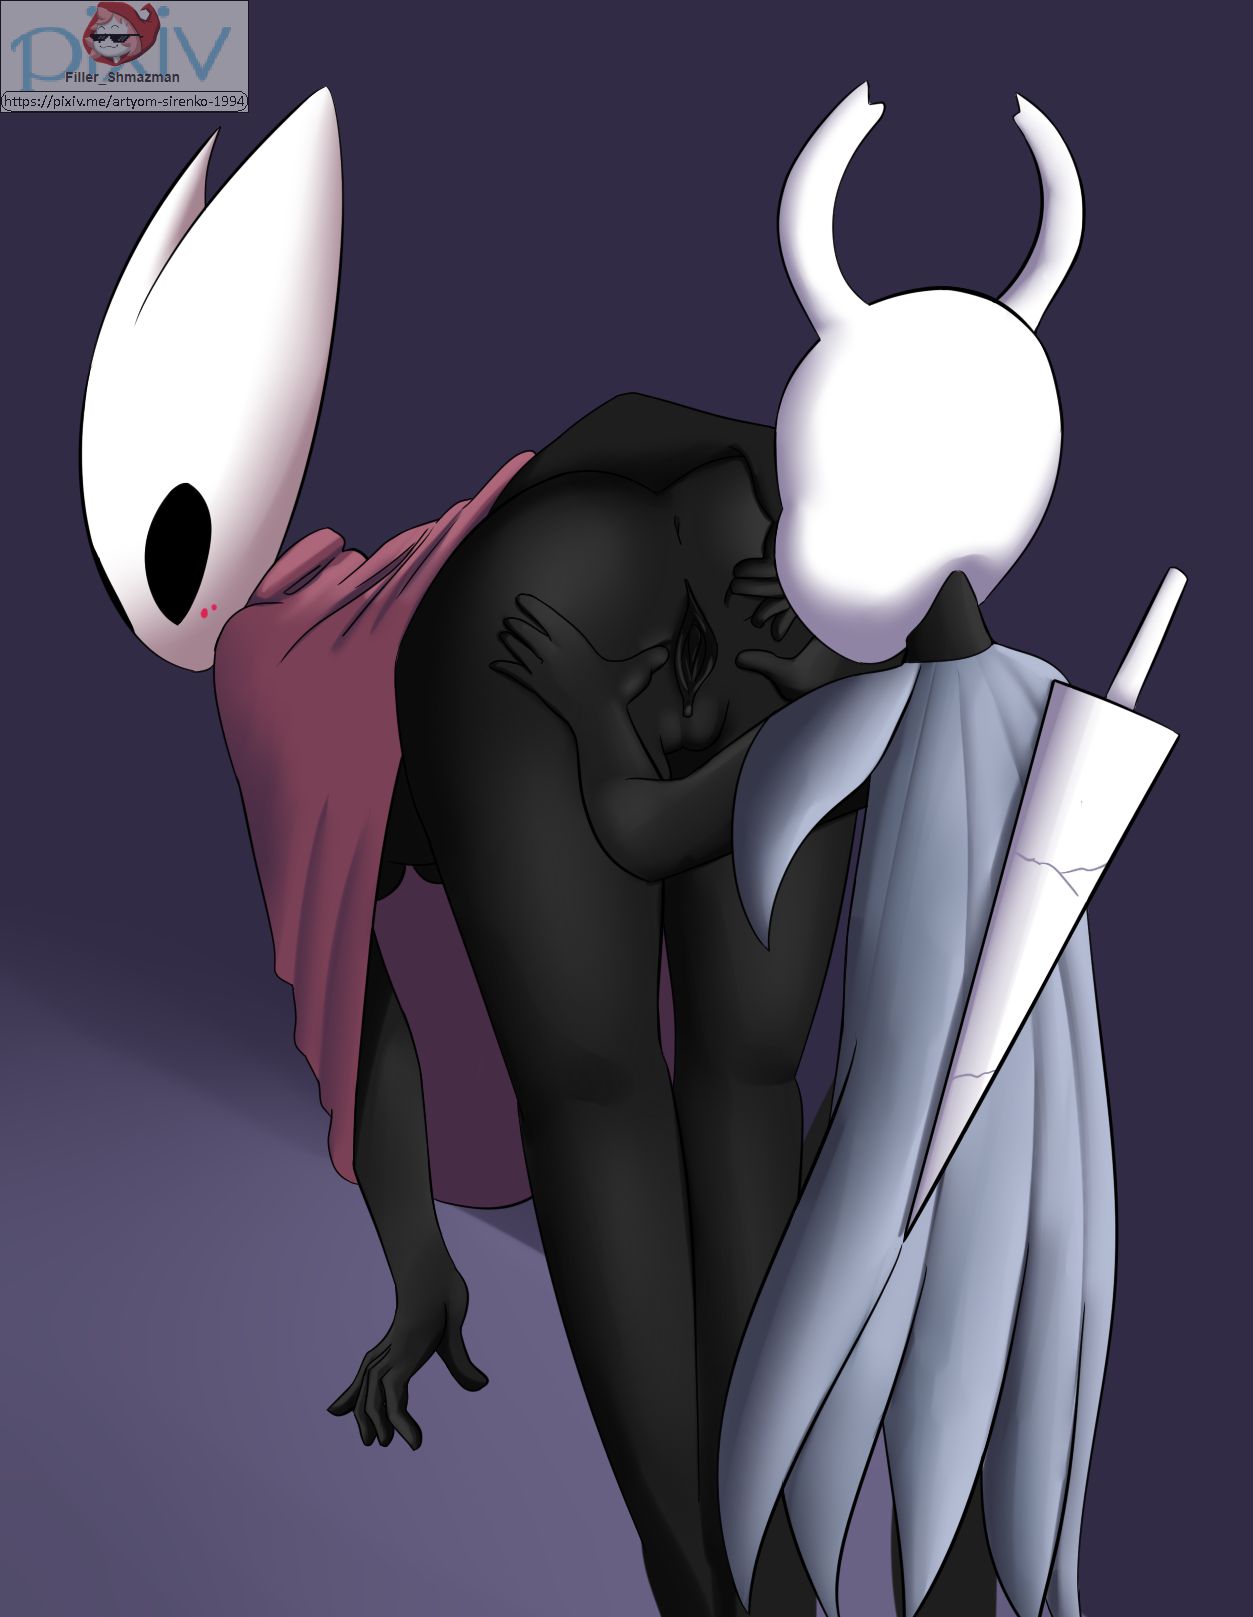 Hollow knight collection 217